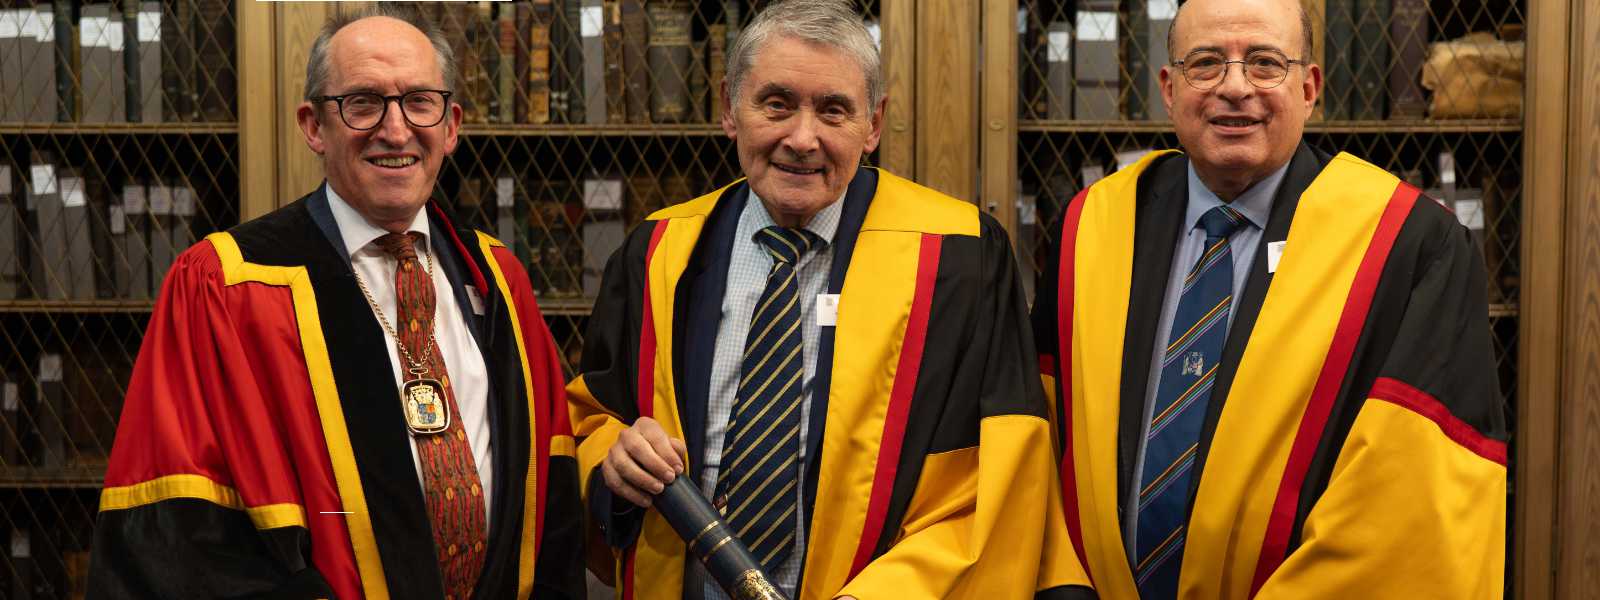 Mr Mike McKirdy, President of the Royal College of Physicians and Surgeons of Glasgow; Sir Harry Burns; Professor Hany Eteiba, President-Elect of the College, who read the citation at the Honorary Fellowship ceremony. The picture was taken in the Lower Library of the College, which is based on St Vincent Street, Glasgow.